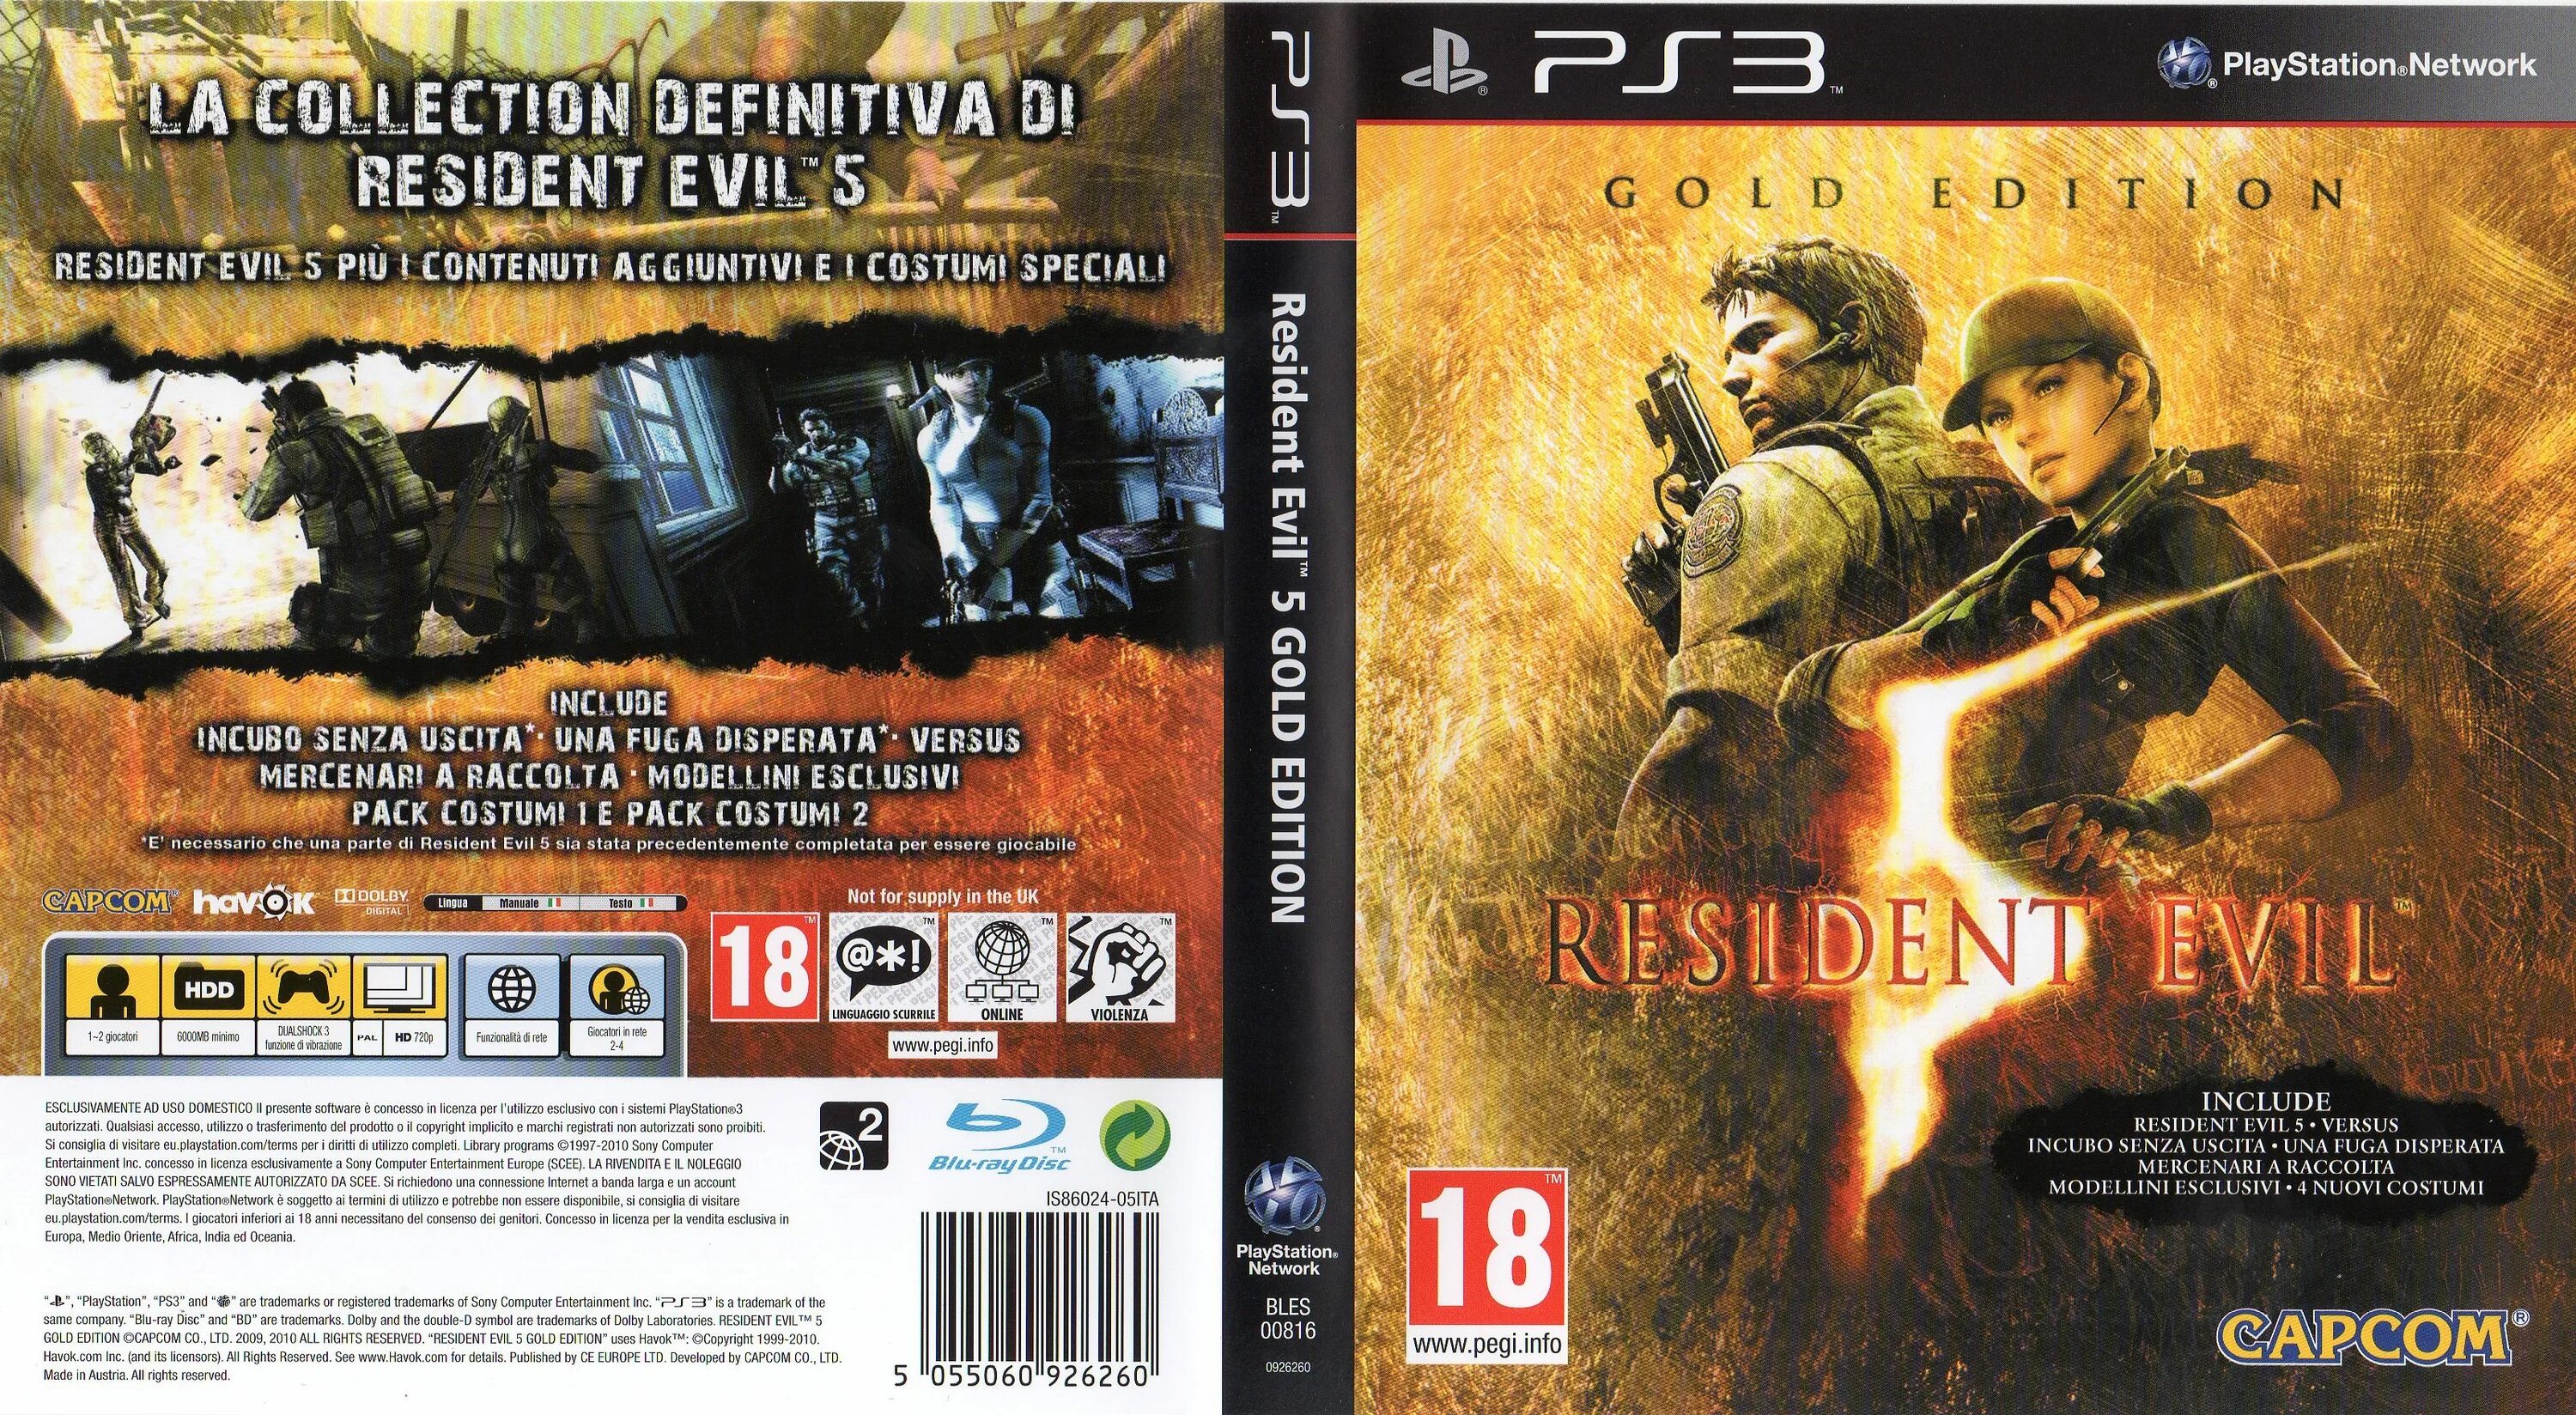 Ps3 игры 5. Resident Evil 5 Gold Edition ps3. Resident Evil 5 Gold Edition ps3 Cover. Resident of Evil 5 ps3-ps3. Диск Resident Evil 3 ps5.